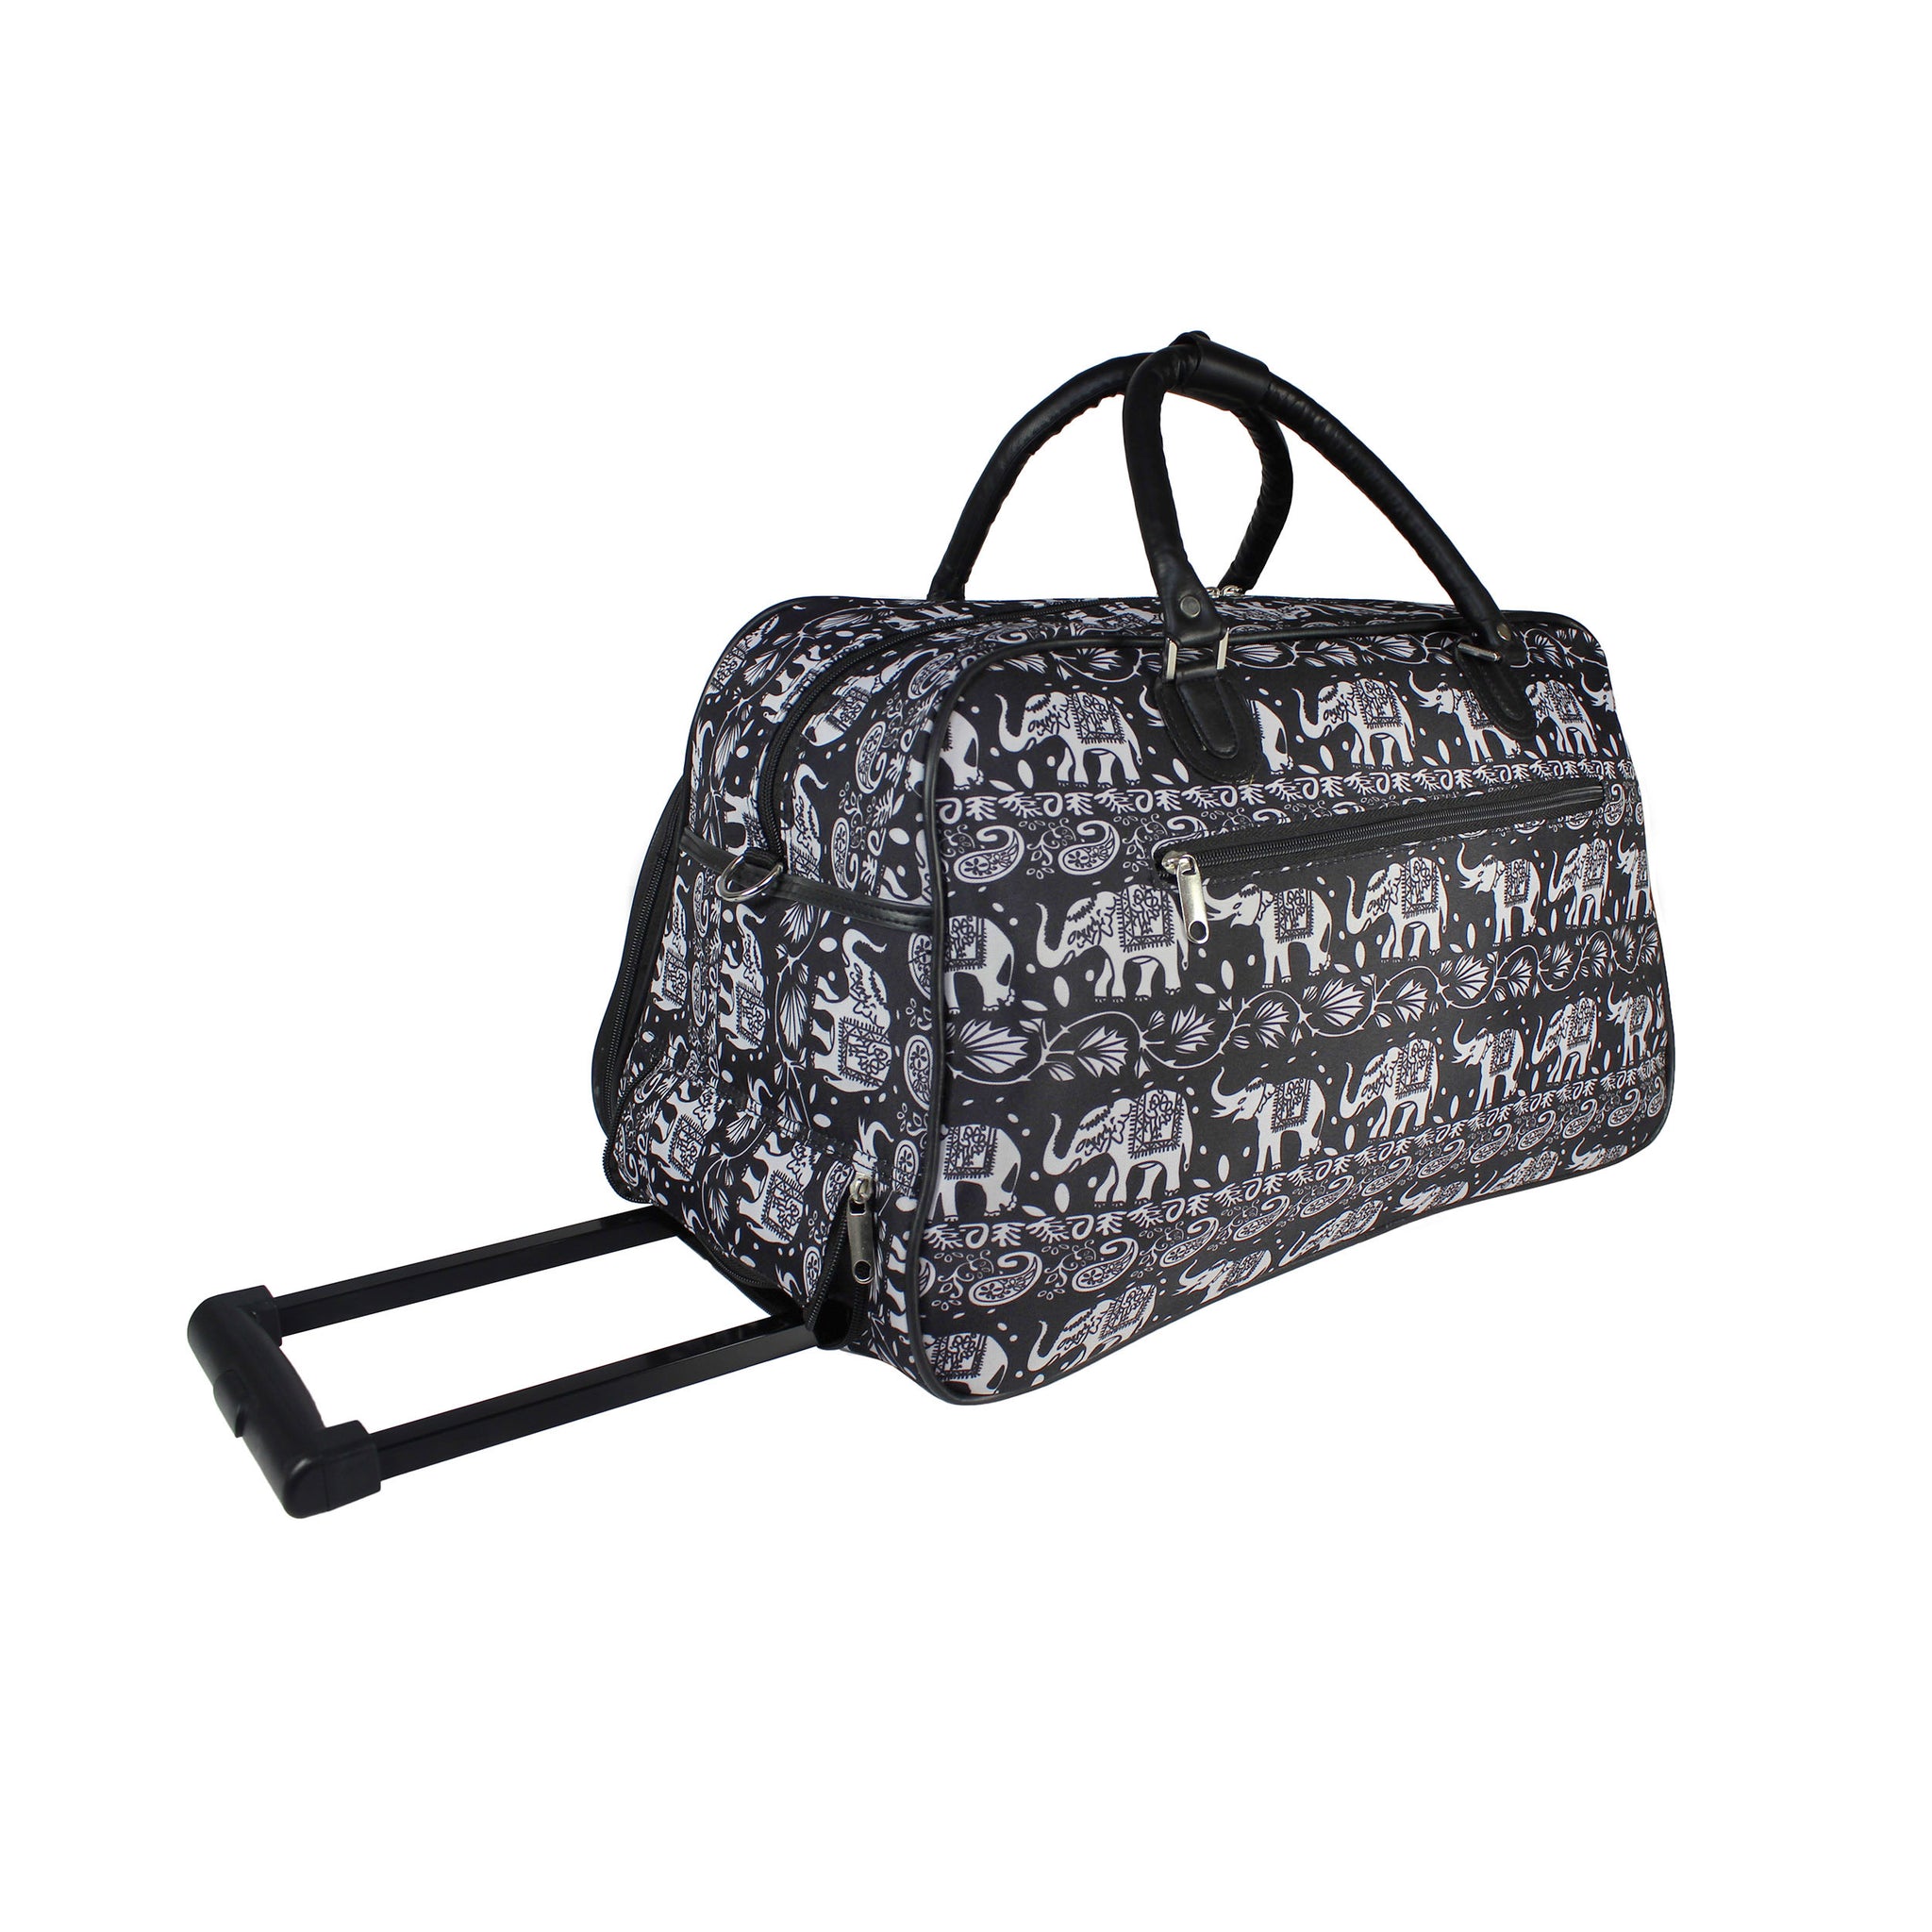 CalBags Elephant 21" Rolling Carry-On Duffel Bags